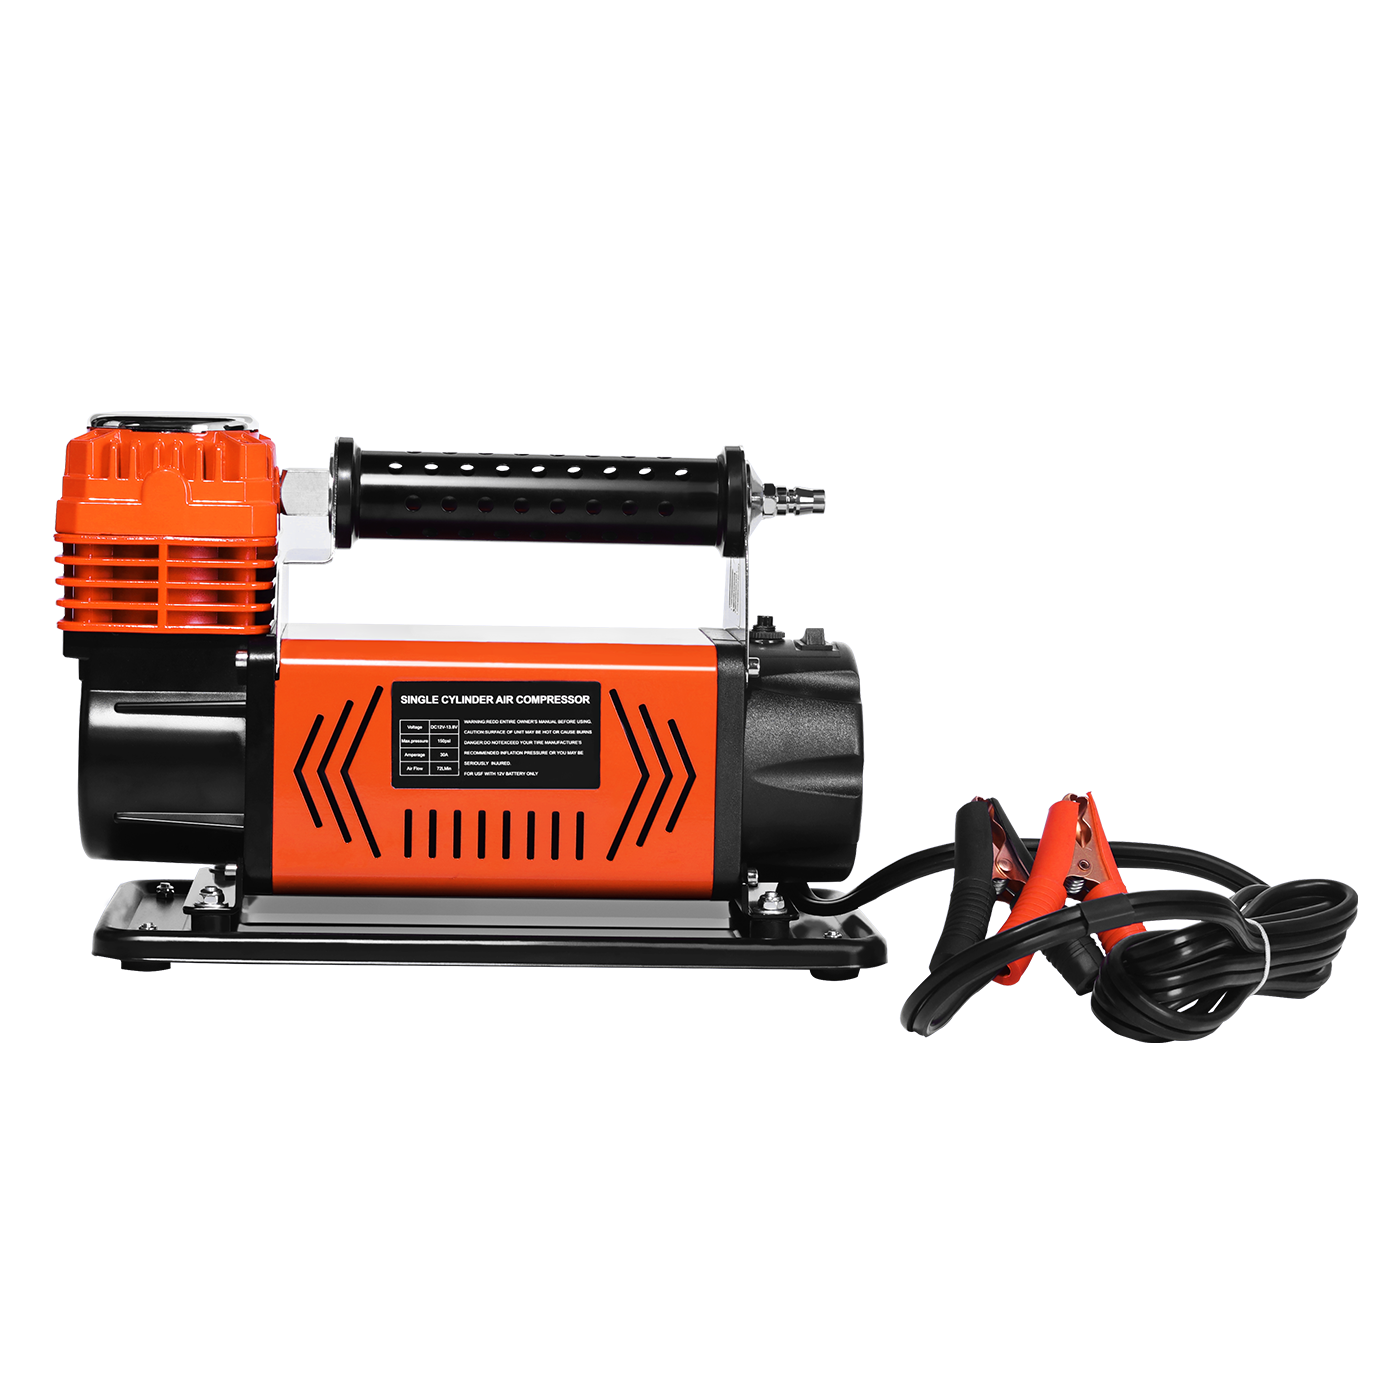 ROADPOWER Portable Double Cylinder Air Compressor Tire Inflator